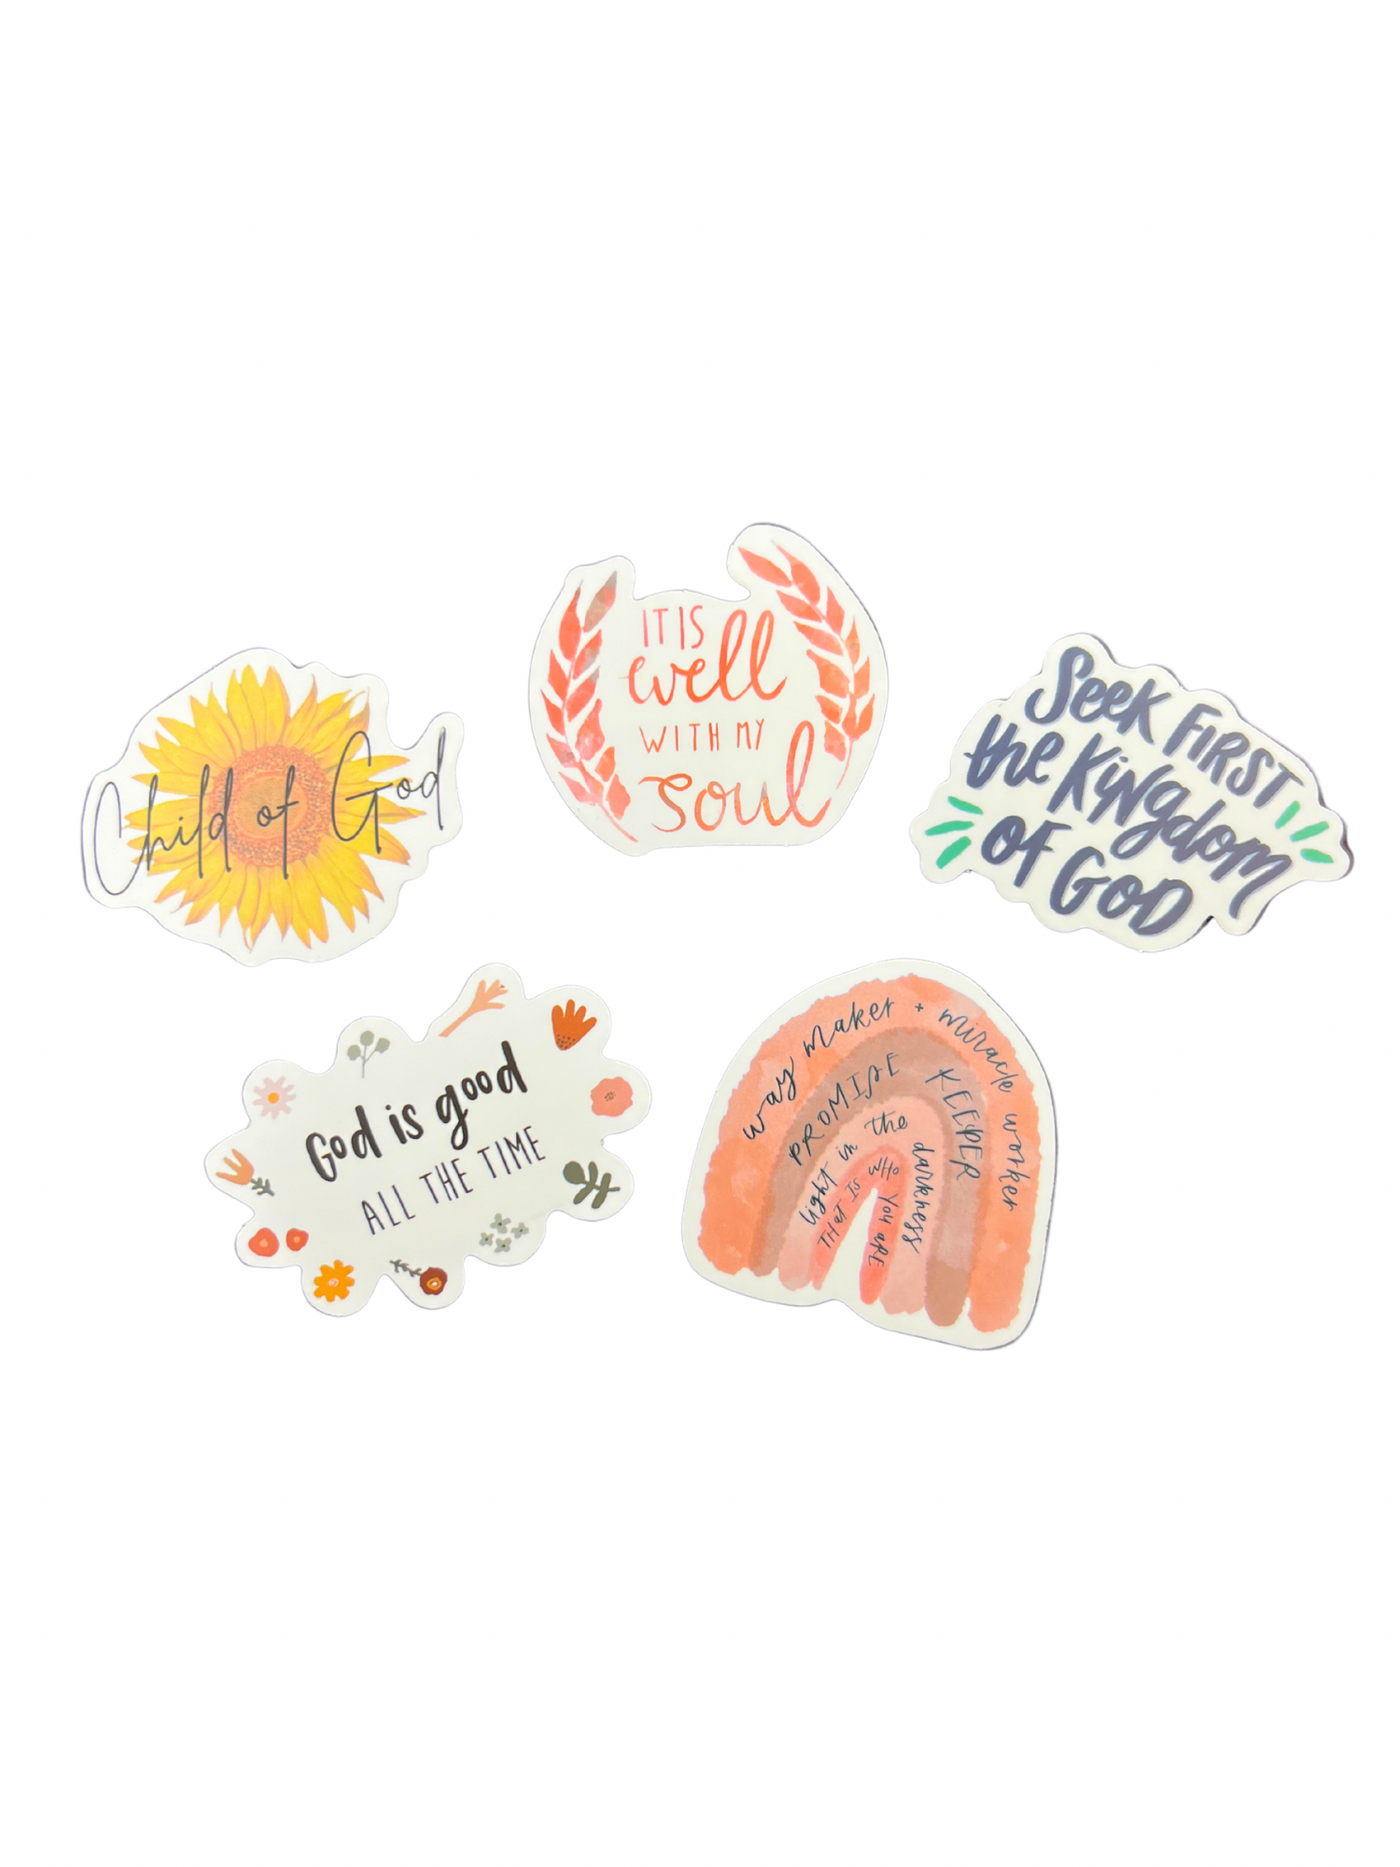 Set of 5 Christian Stickers in vibrant in white background.